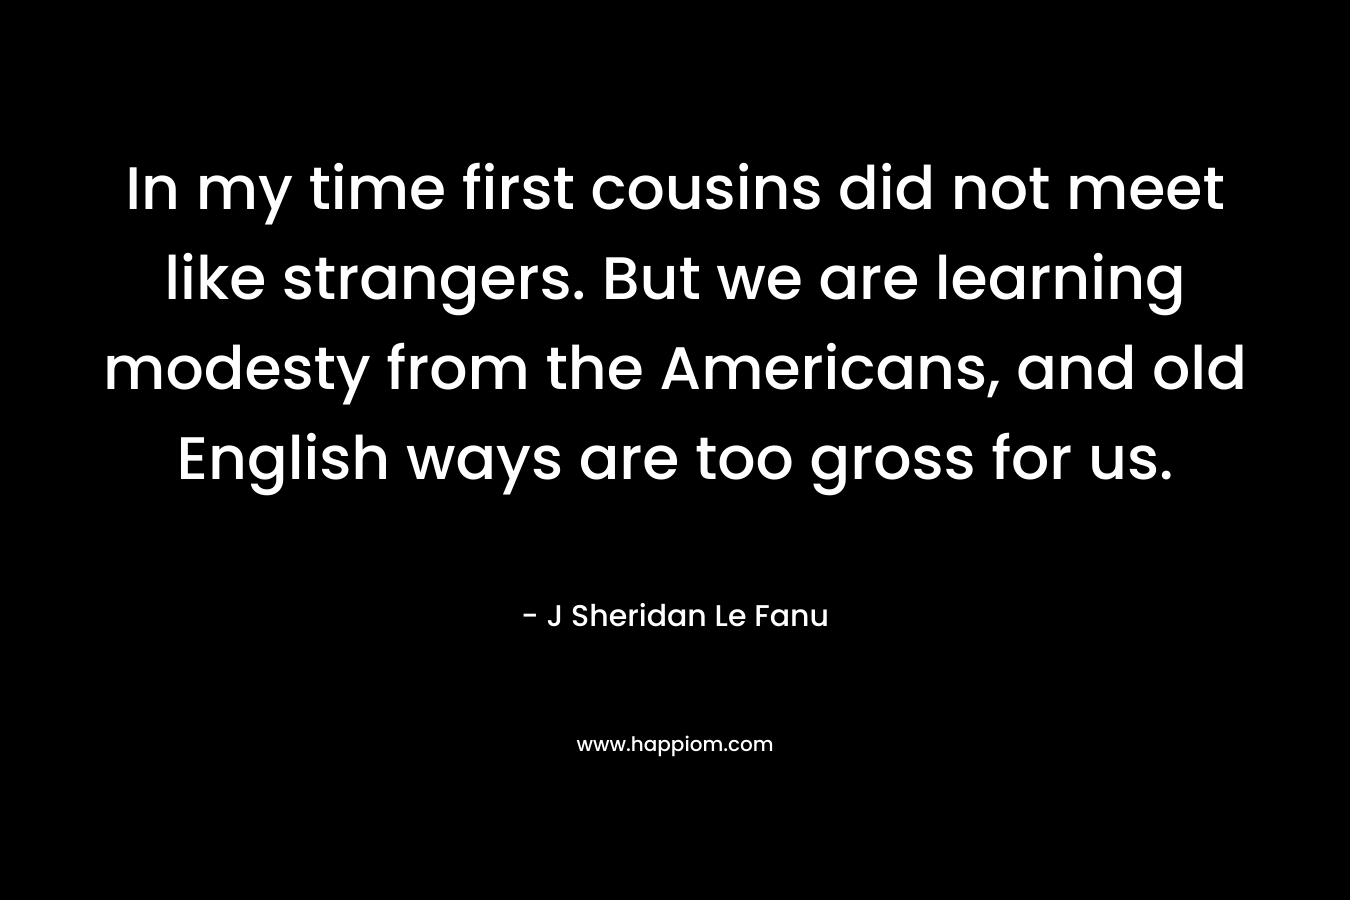 In my time first cousins did not meet like strangers. But we are learning modesty from the Americans, and old English ways are too gross for us.